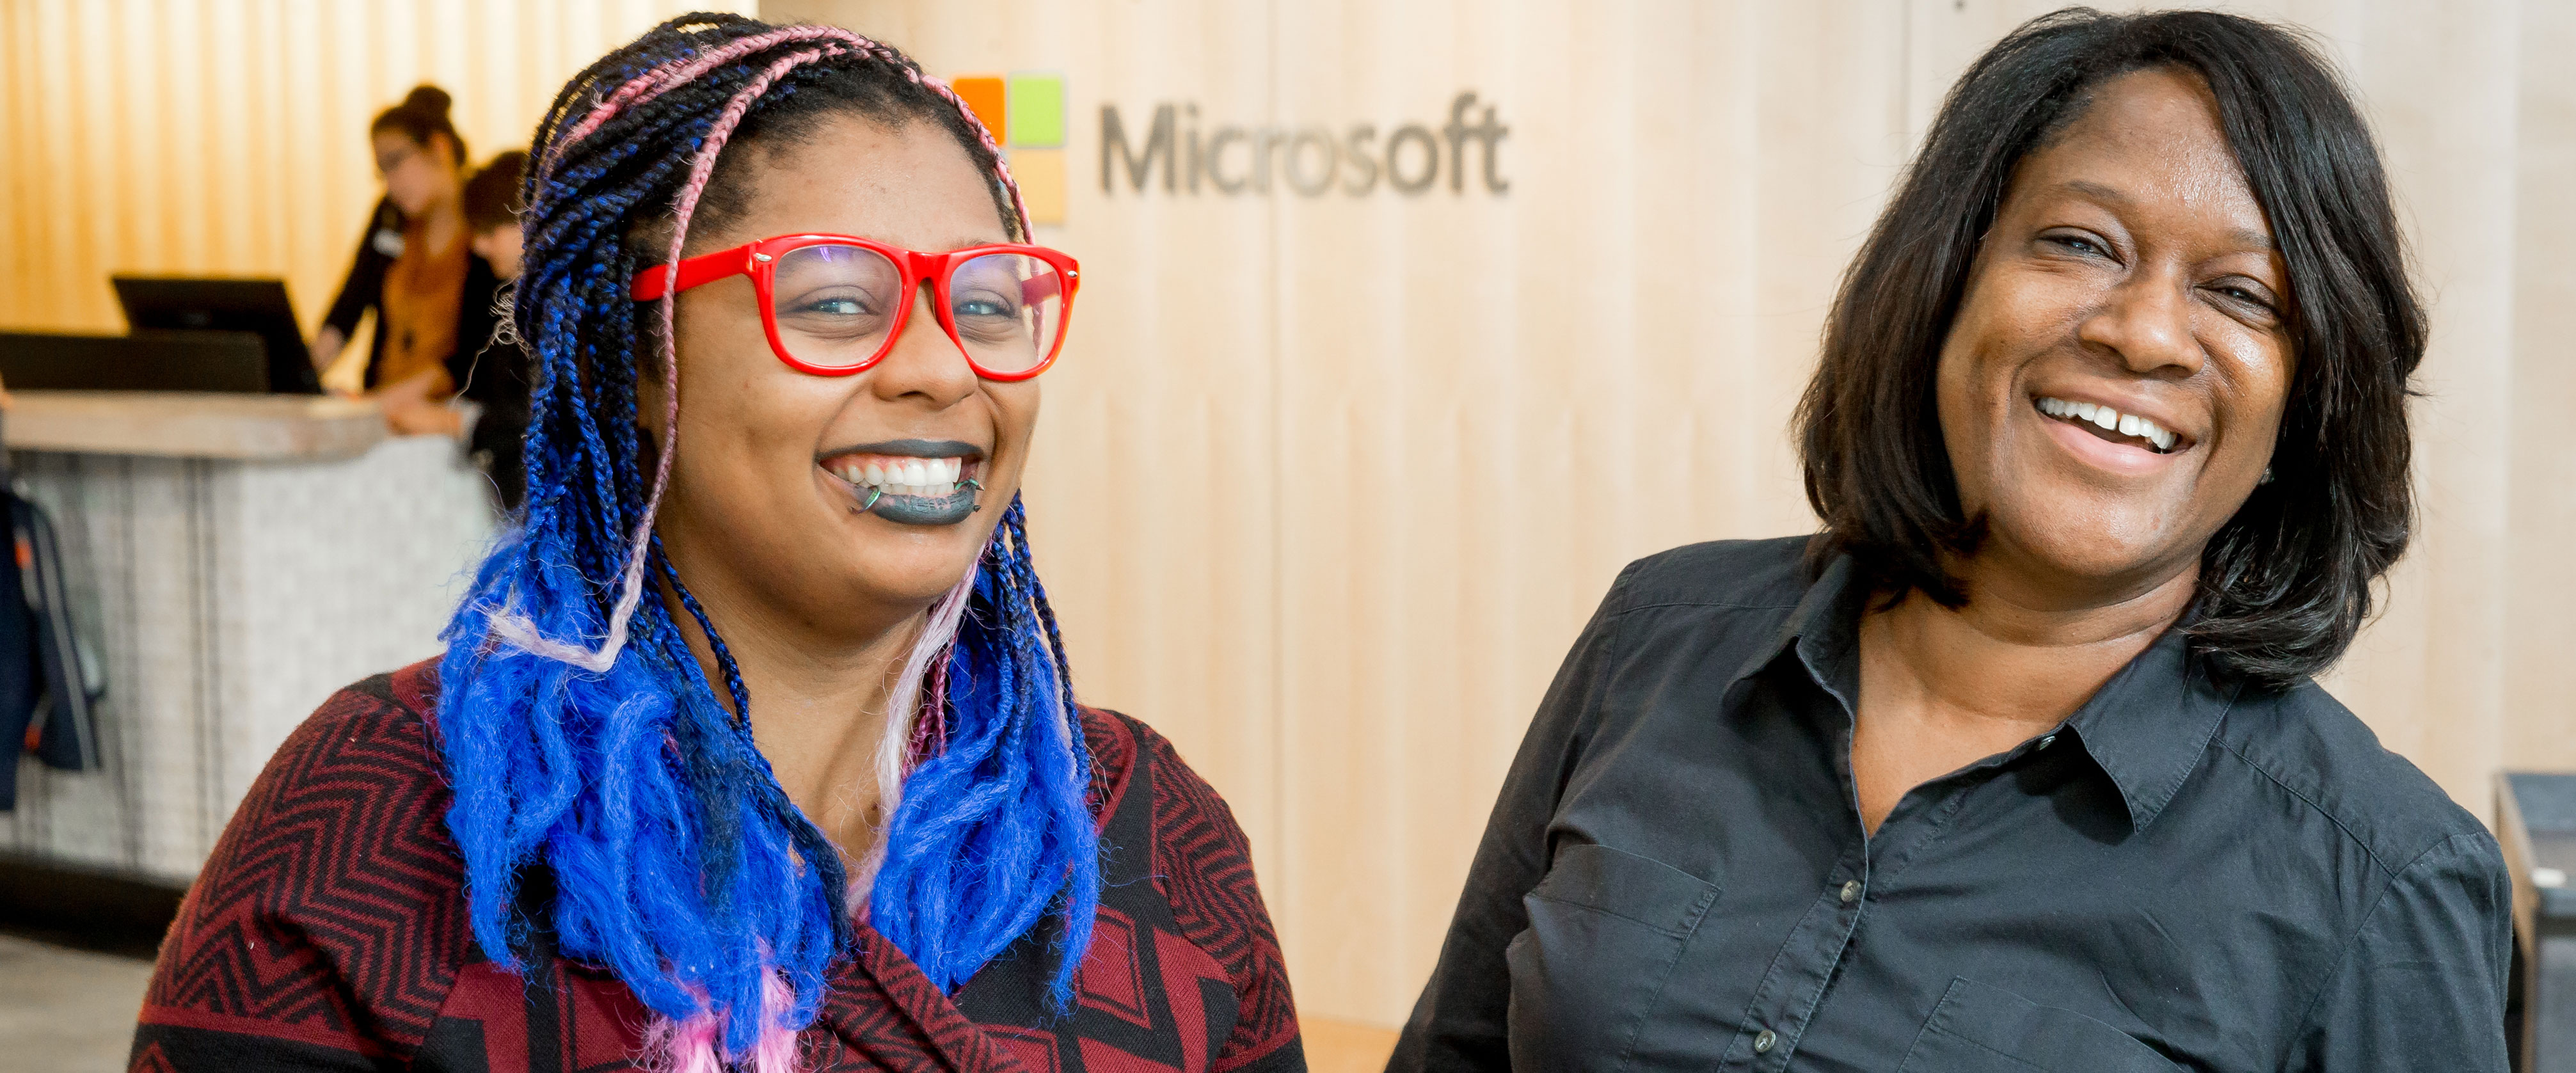 Photo of Kiara Blue and Jacky Wright smiling together in front of a wood-paneled wall with a Microsoft logo.